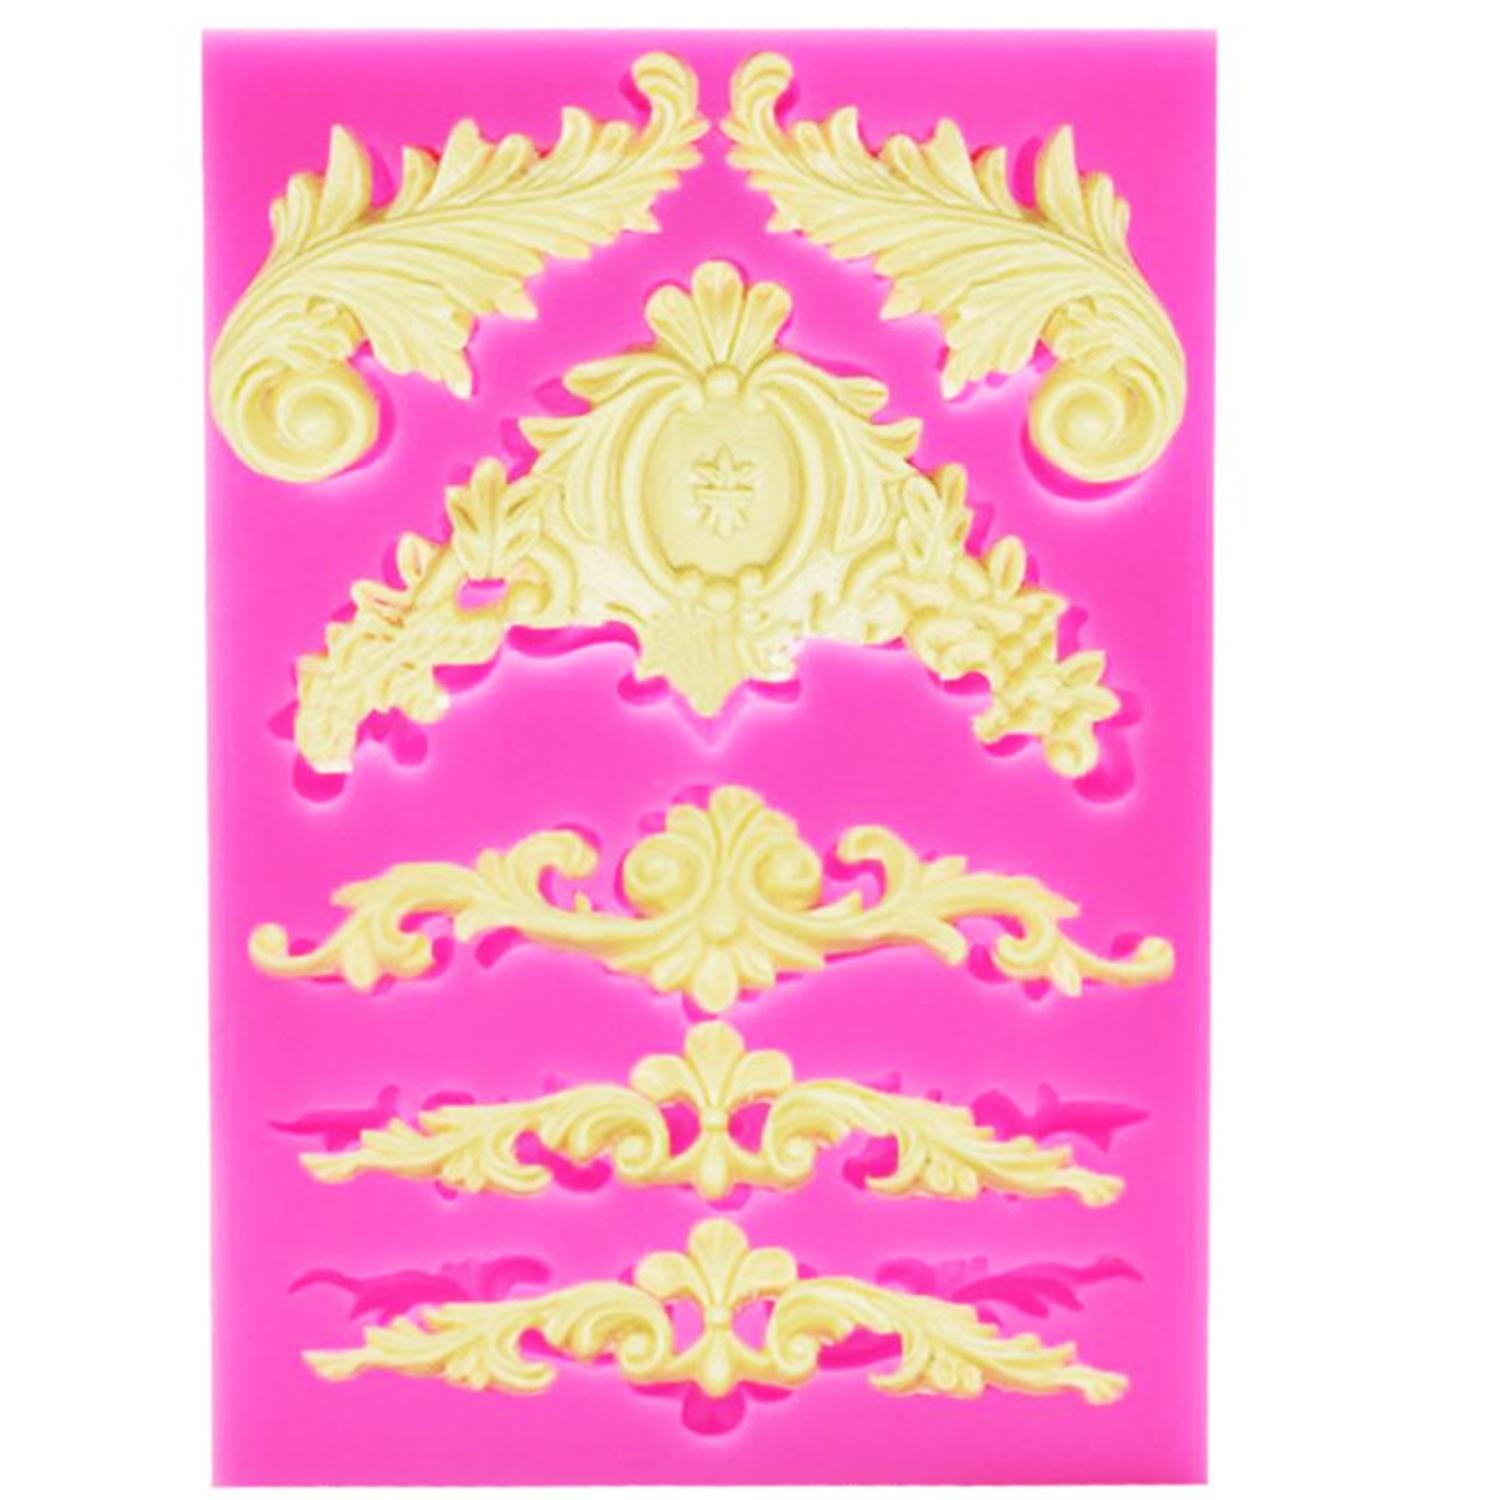 SFGM0035 DAMASK ACCENTS 5 STYLES BORDER MOULD